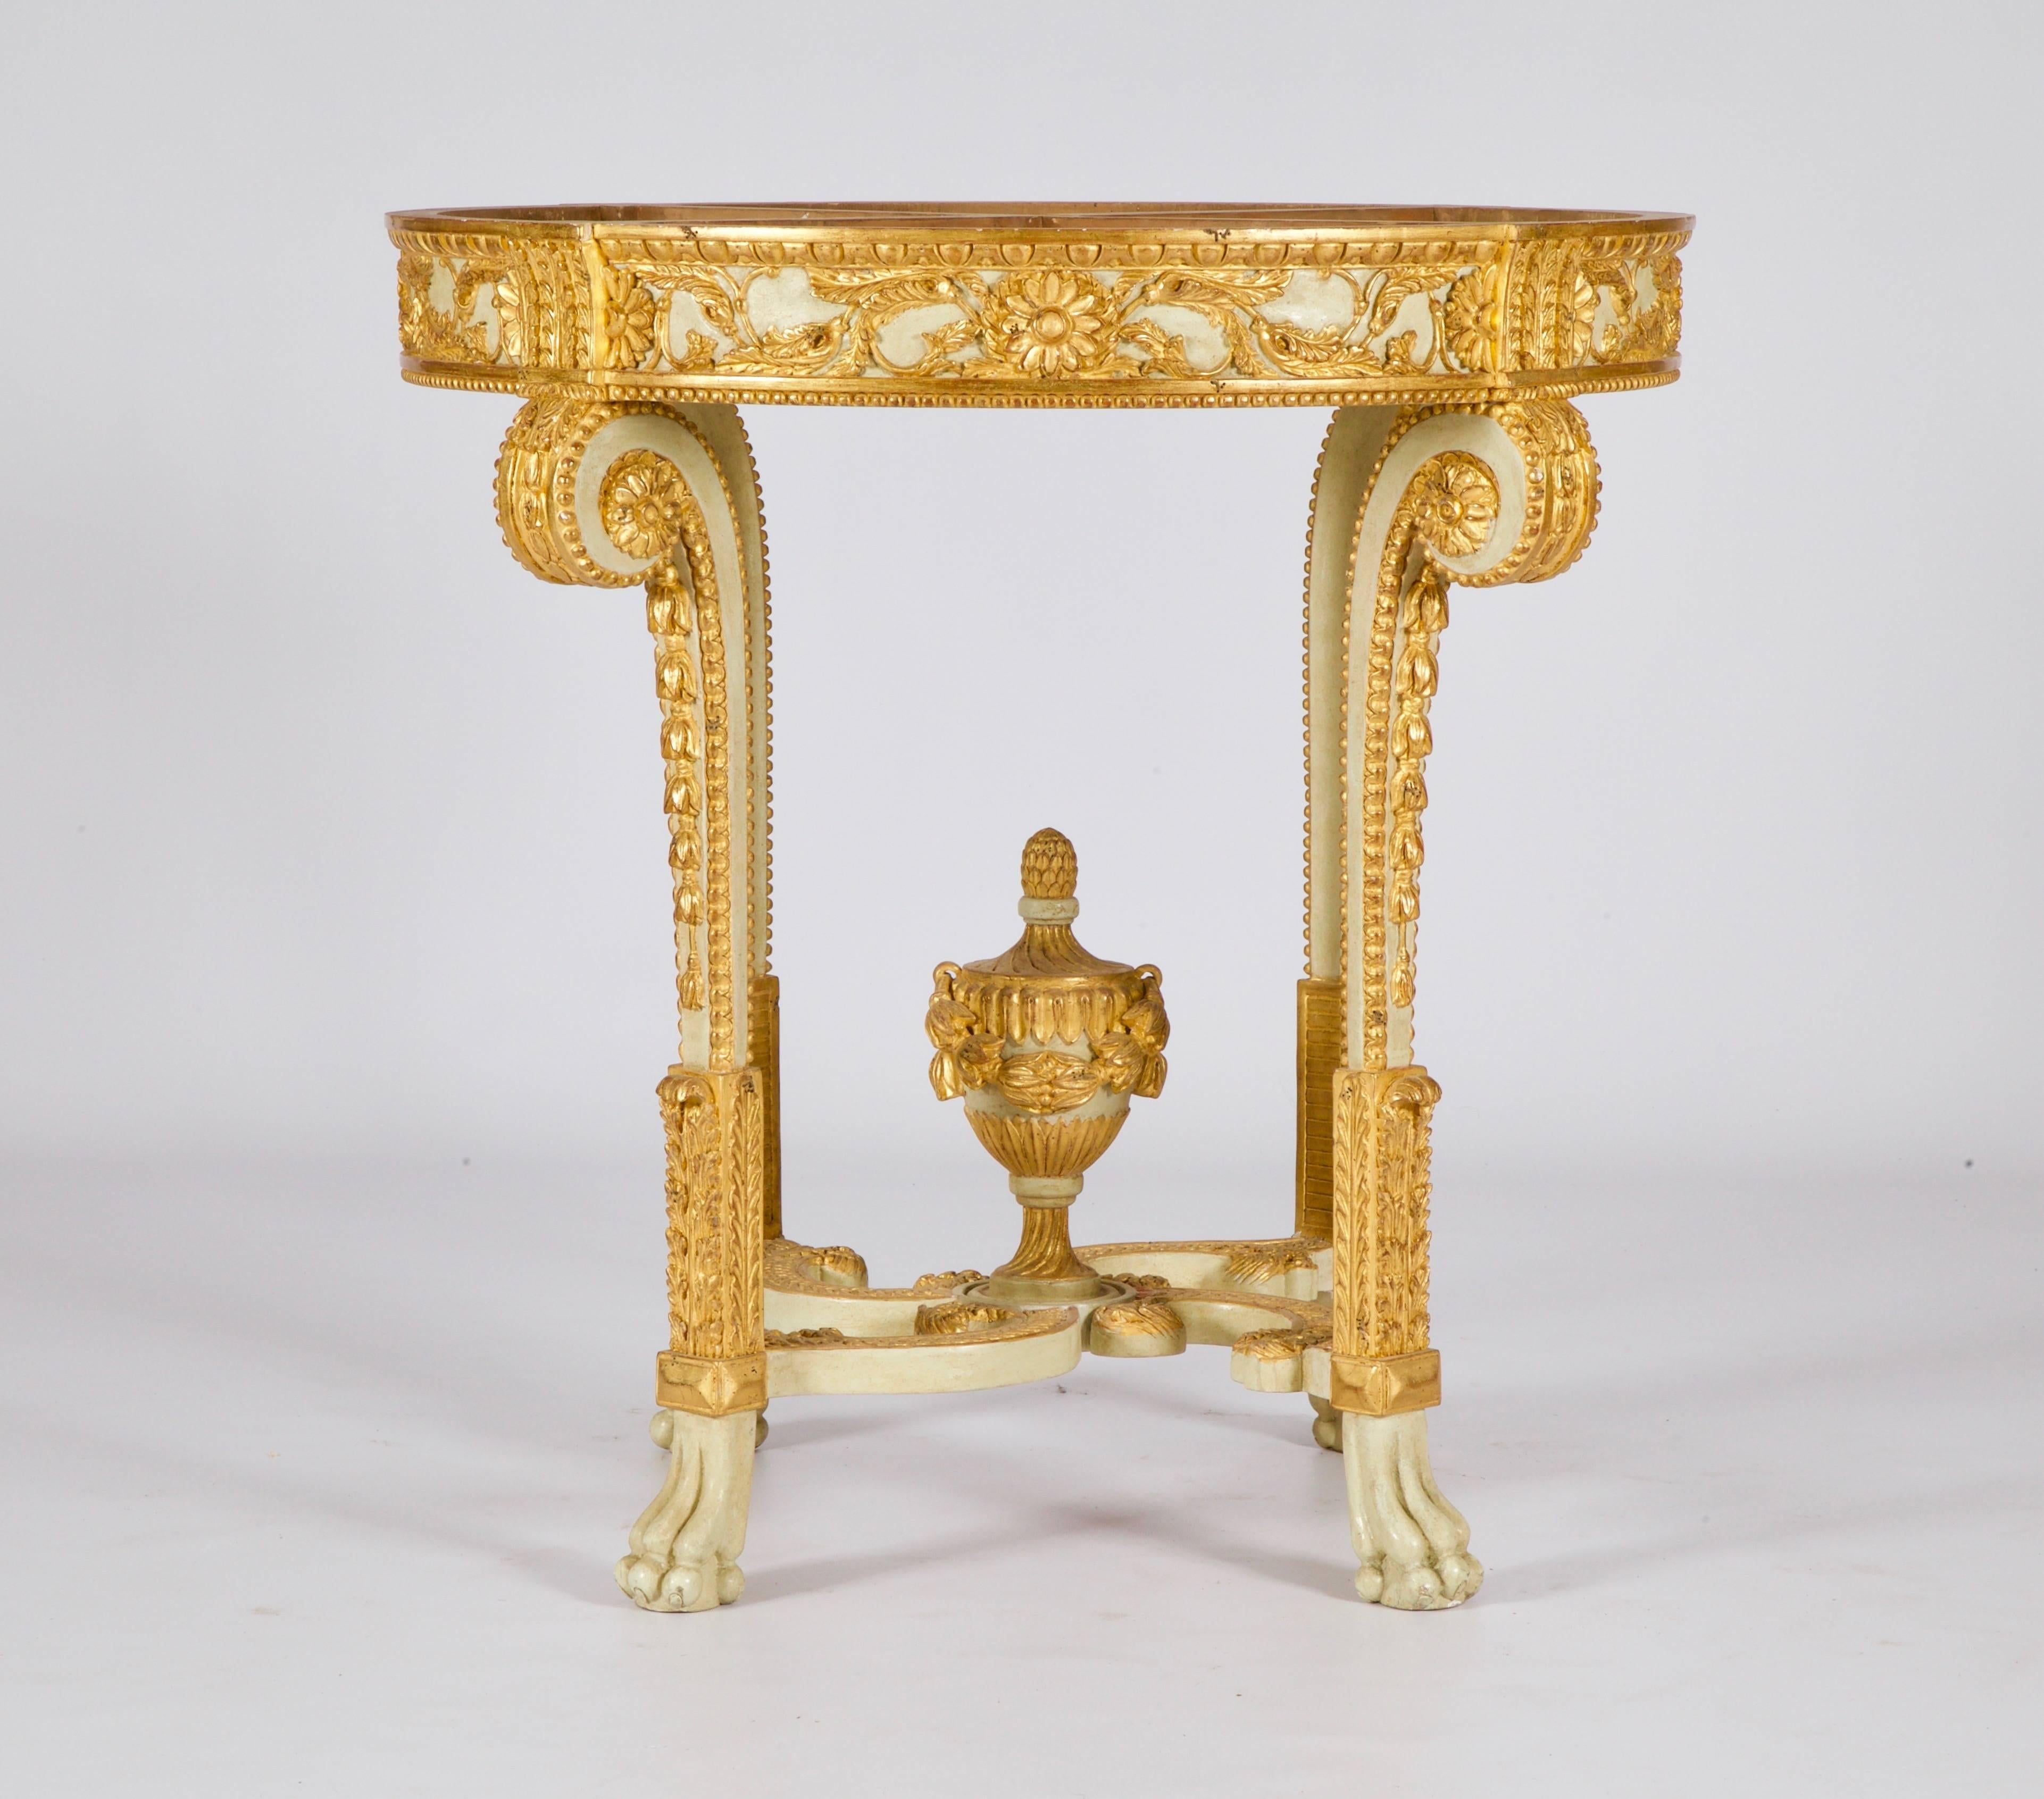  Louis XVI style round console table. Hand-carved by master craftsmen and hand finished in an aged polychrome gilded and ecru/white patina made using traditional methods and materials. A beveled top can be made to order from our marble selections on